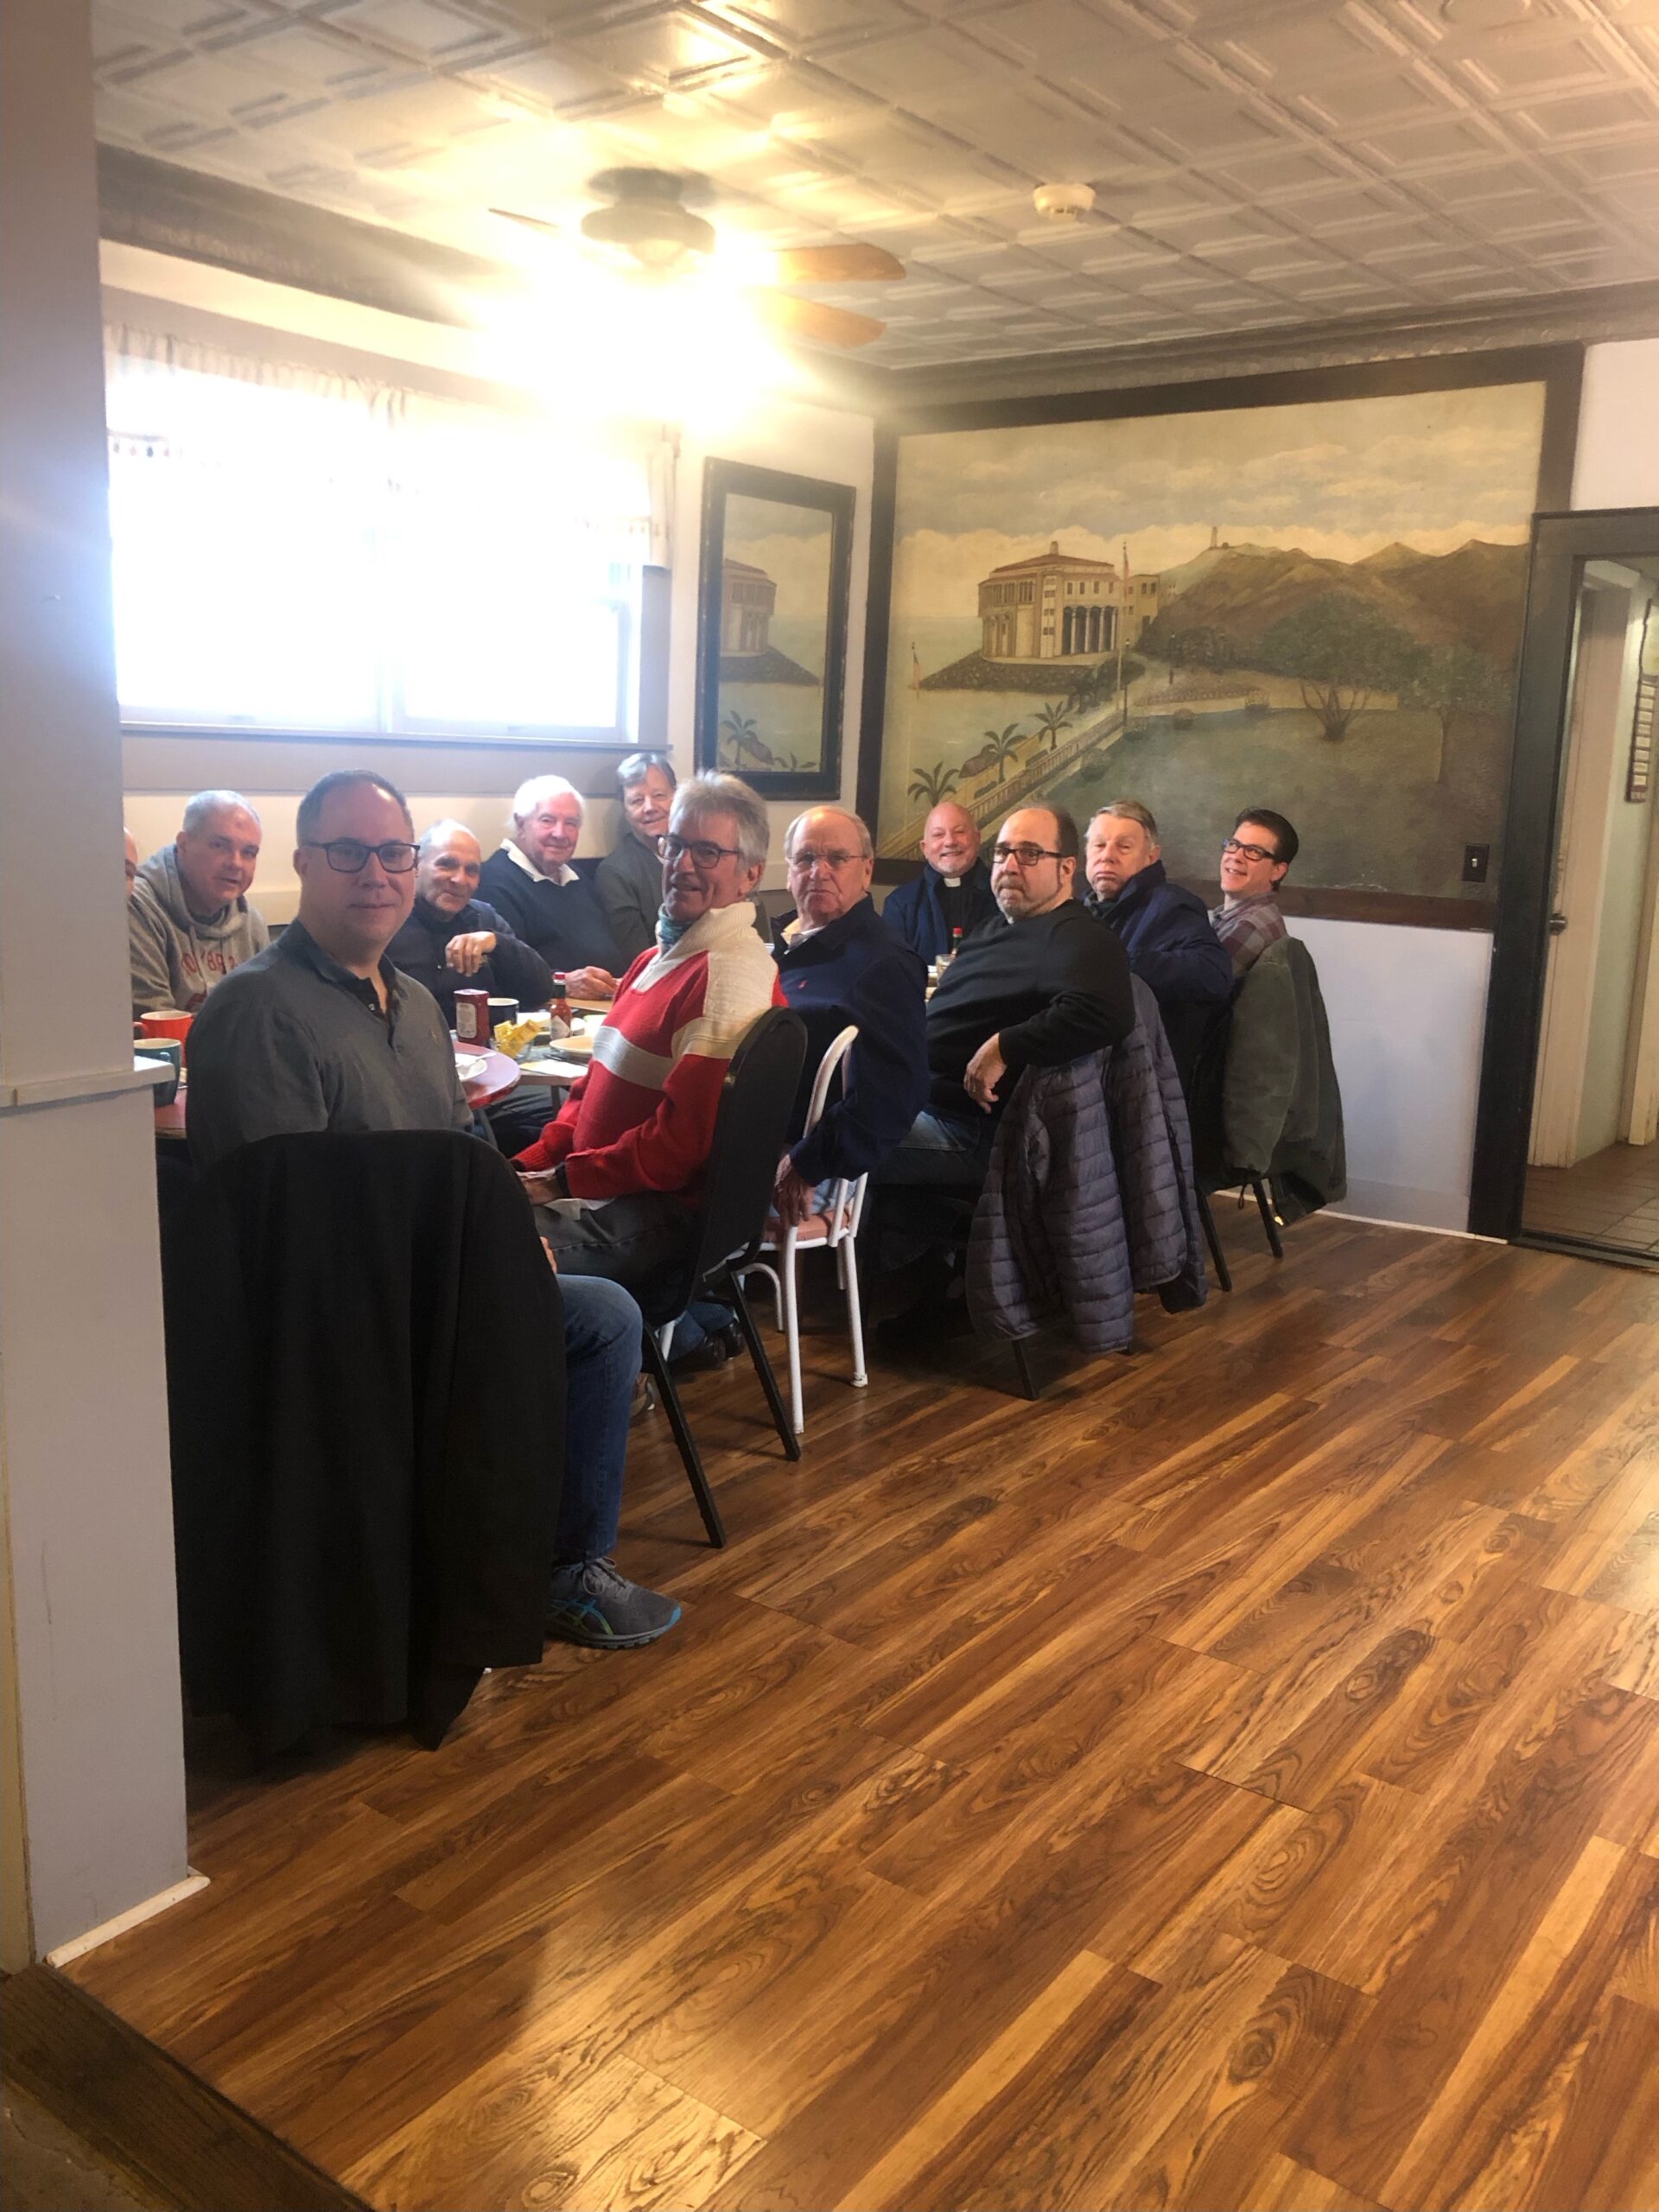 The Men's Breakfast Group at St. Mark's Church in Westhampton Beach recently gathered for one of its regular discussions with Father Chris Jubinski. COURTESY TOM HADLOCK